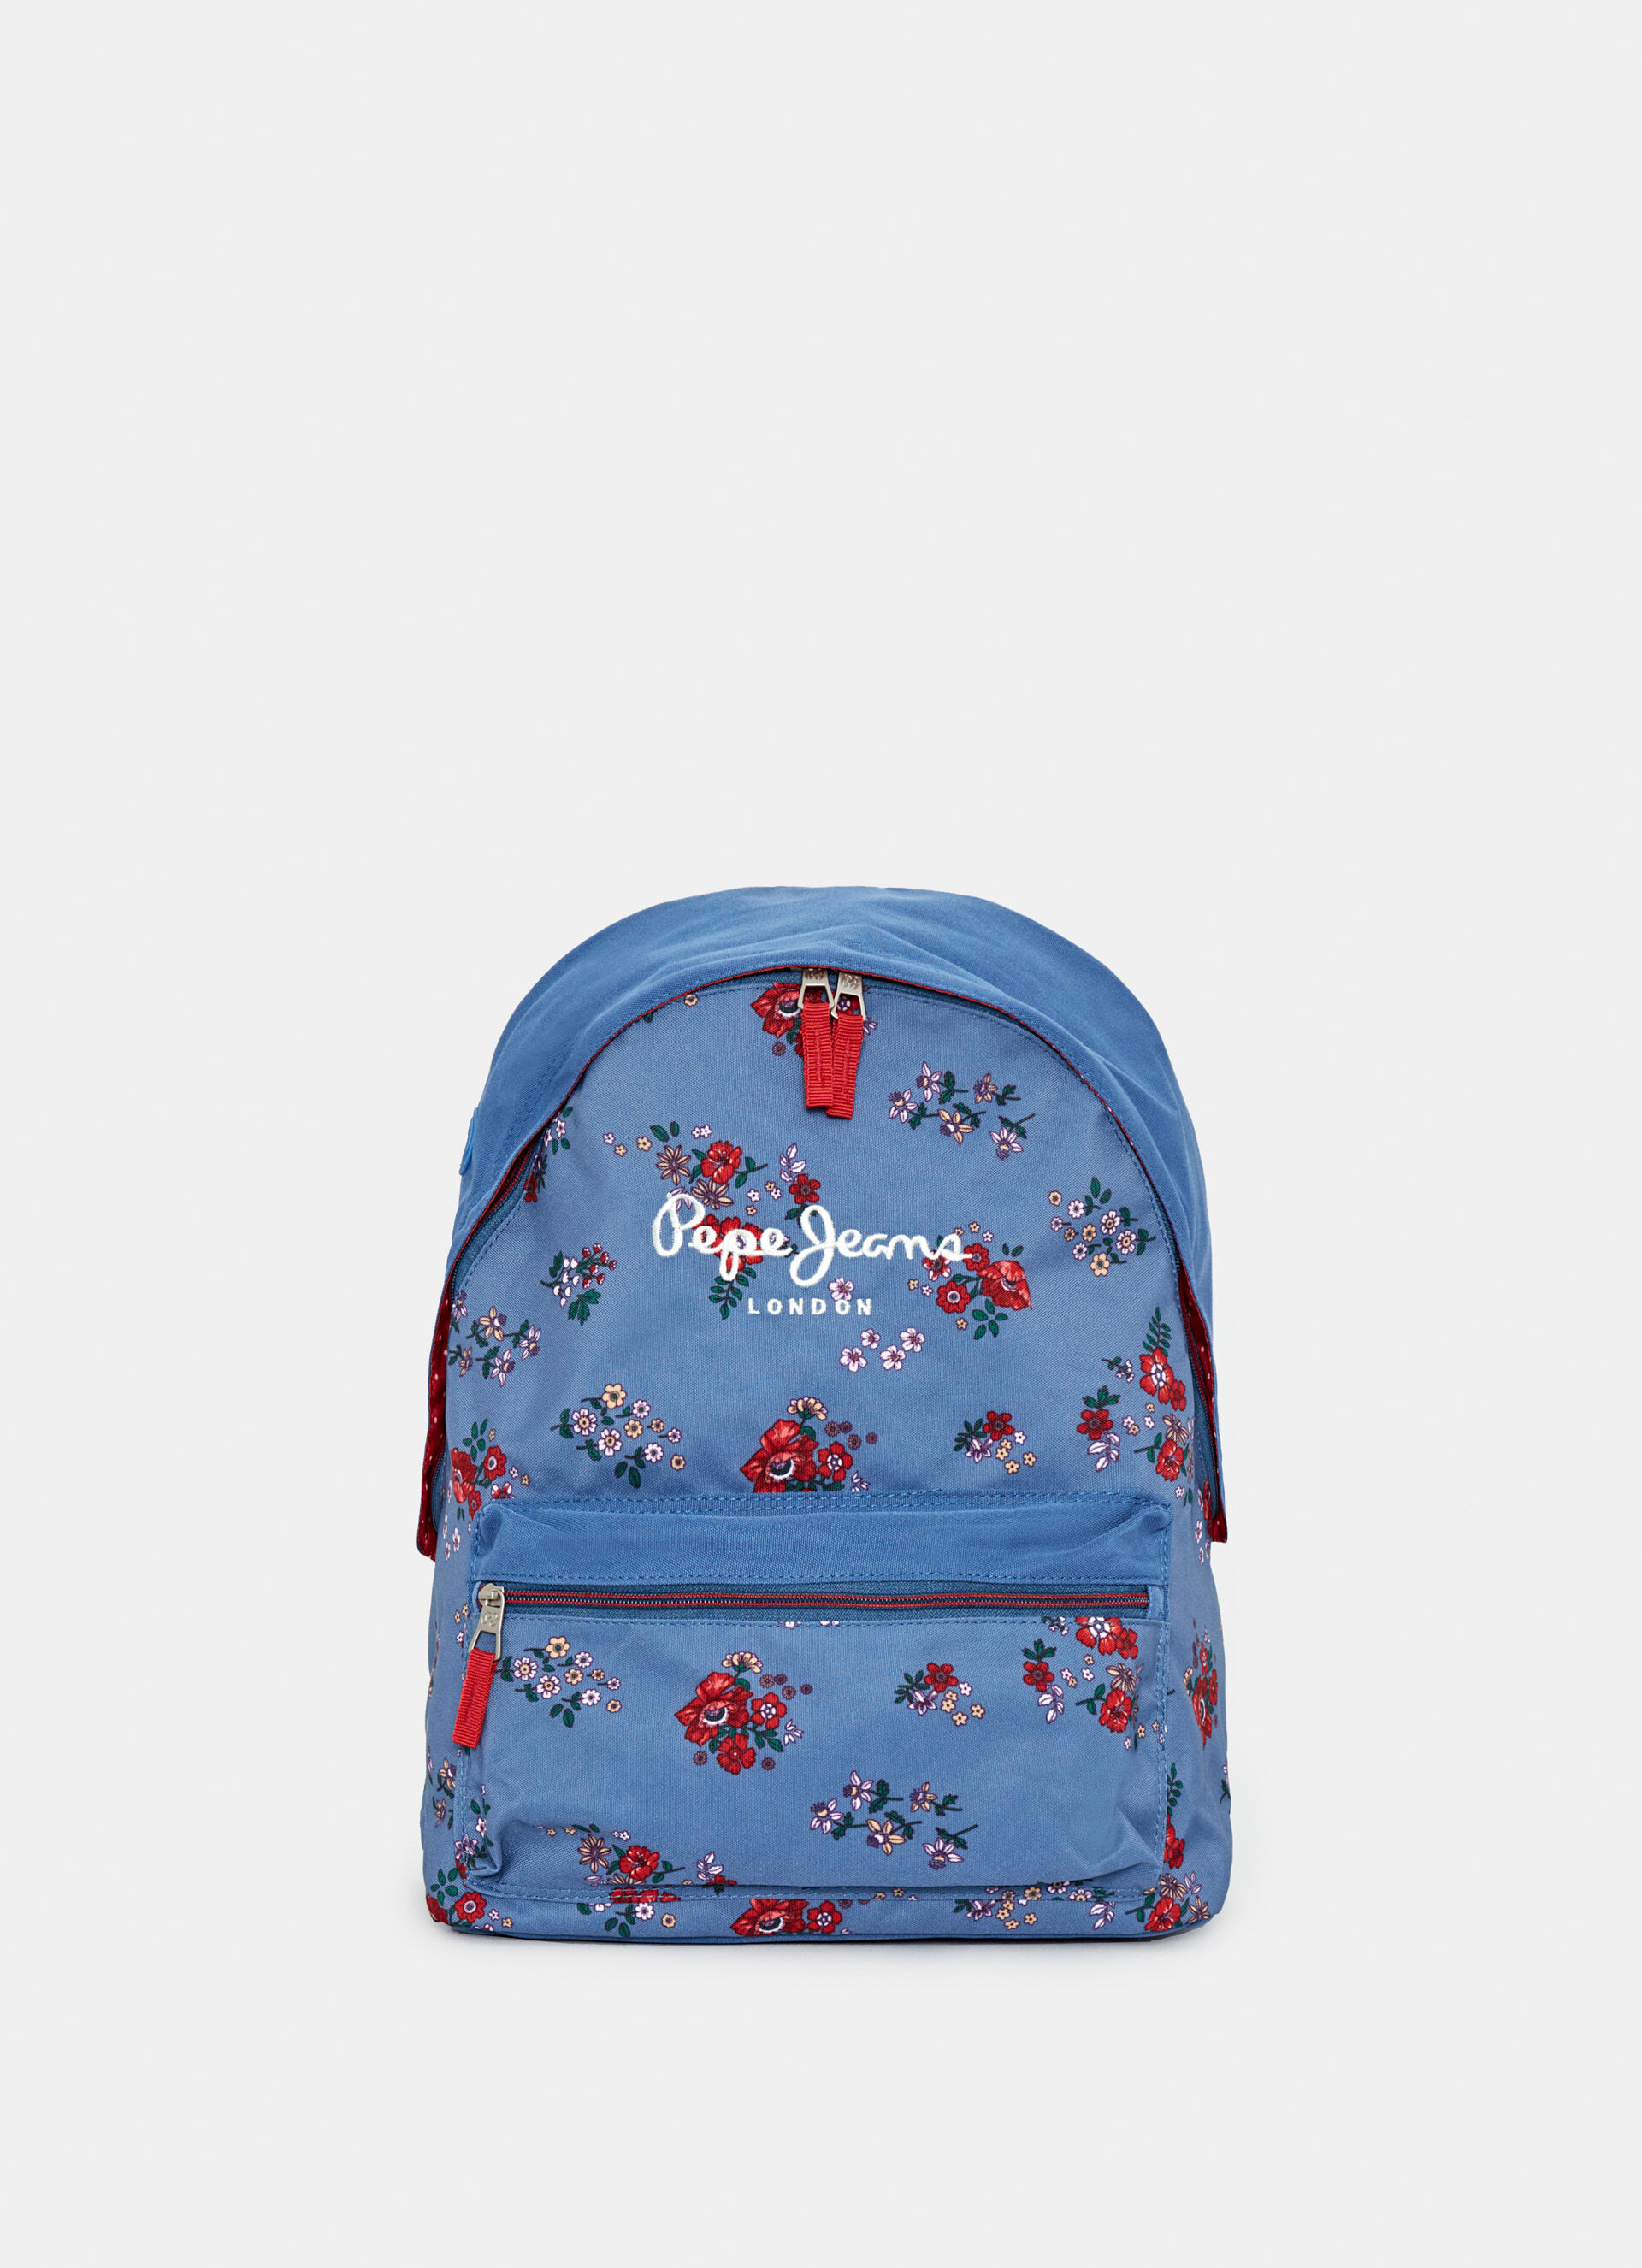 Pepe Jeans School Bags Finland, SAVE 43% - aveclumiere.com